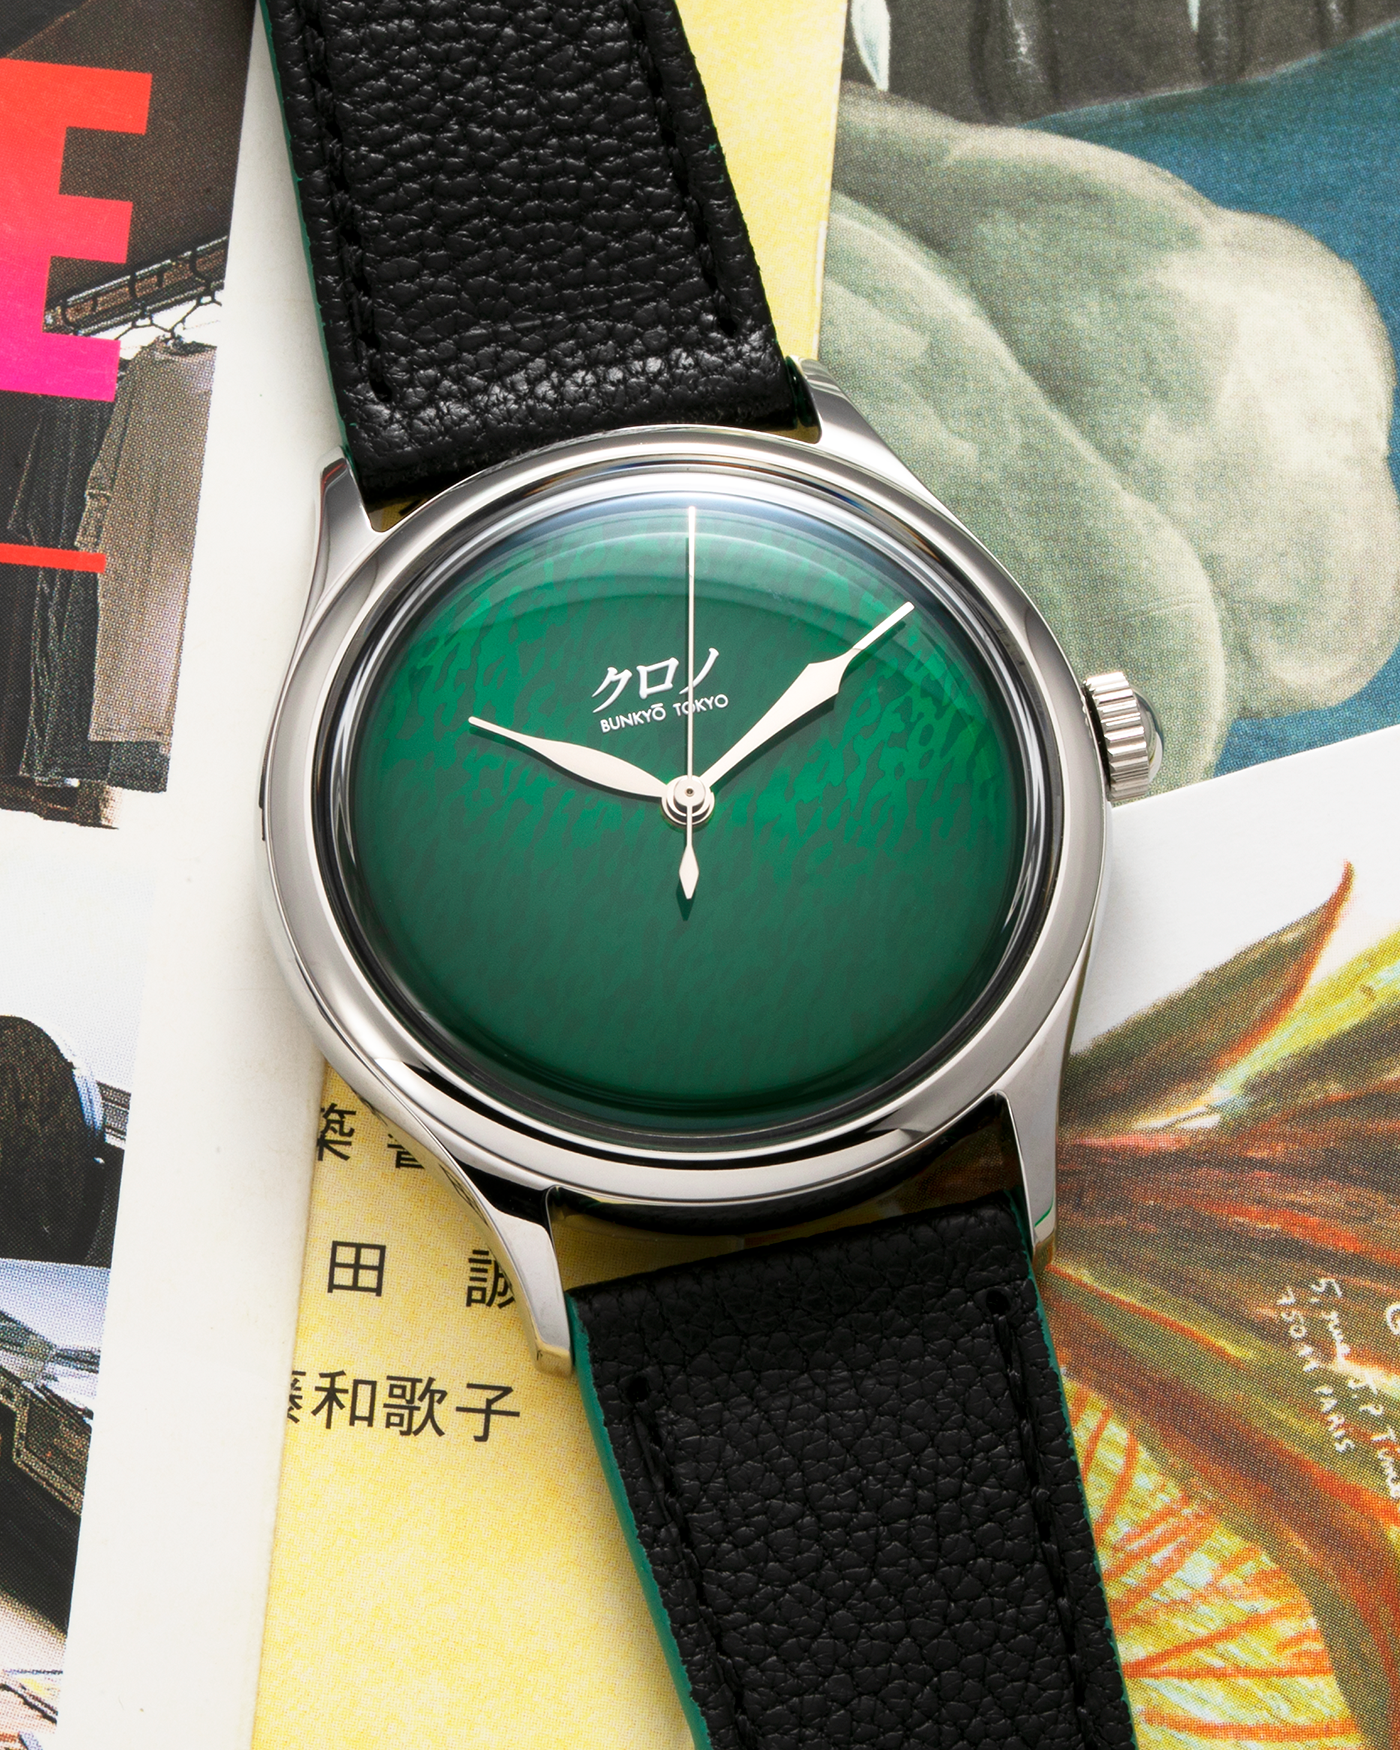 Brand: Kurono Tokyo Year: 2022 Model: Grand Urushi Aoyama (Set of 3), Limited Edition of 188 pieces each Material: Stainless Steel Case, Urushi Lacquer Dial Movement: Miyota 90S5, Self-Winding Case Diameter: 37mm Strap: Kurono Black Calf Leather Straps with Red / Green / Black Embellished Sides and Stainless Steel Tang Buckles